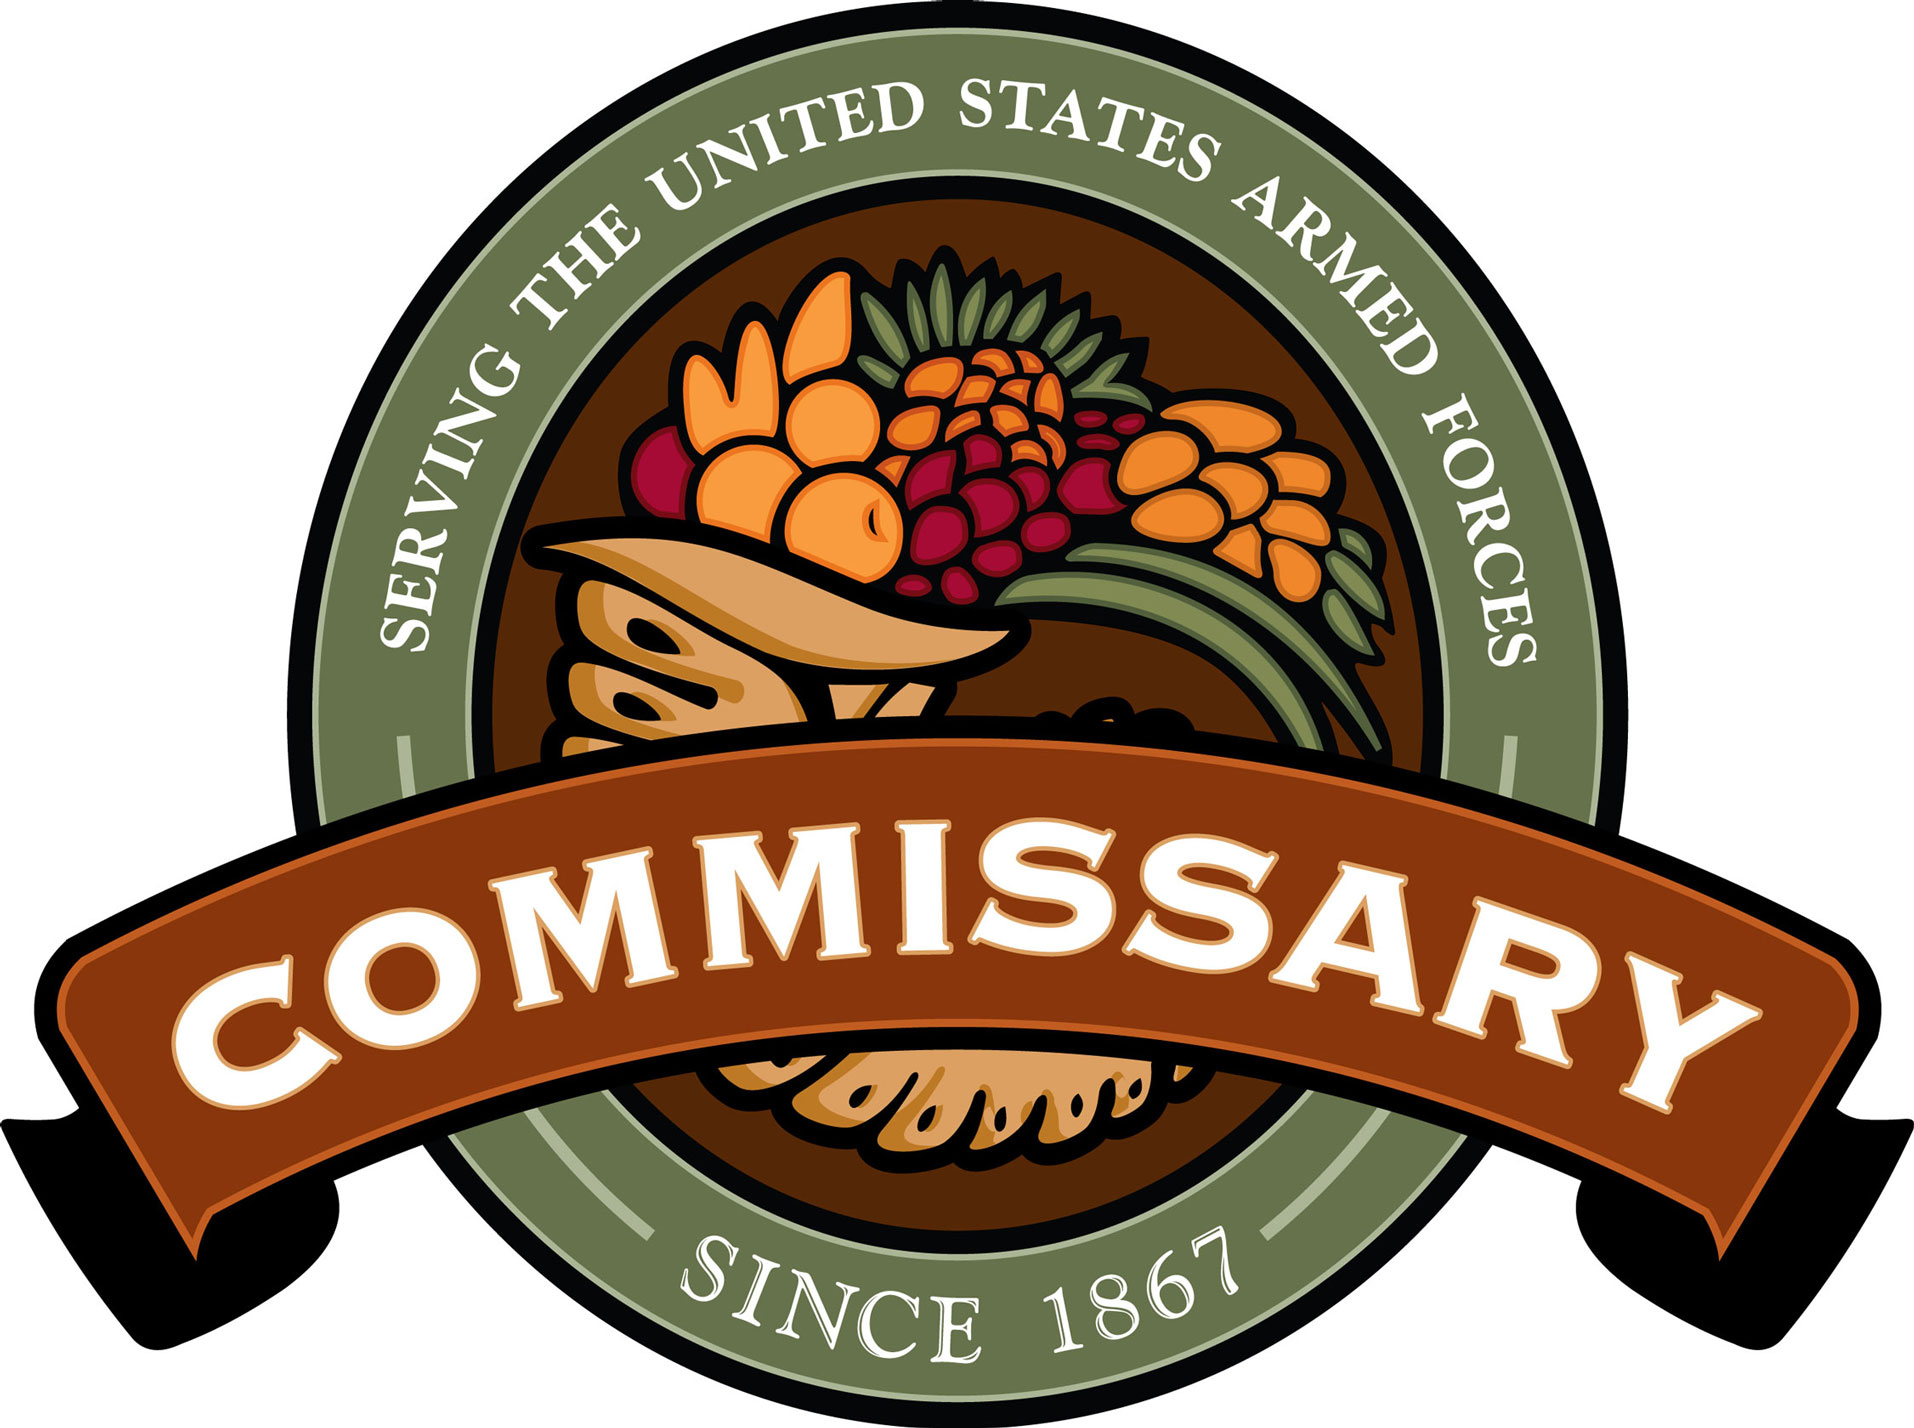 Commissary: Serving the United States Armed Forces since 1867